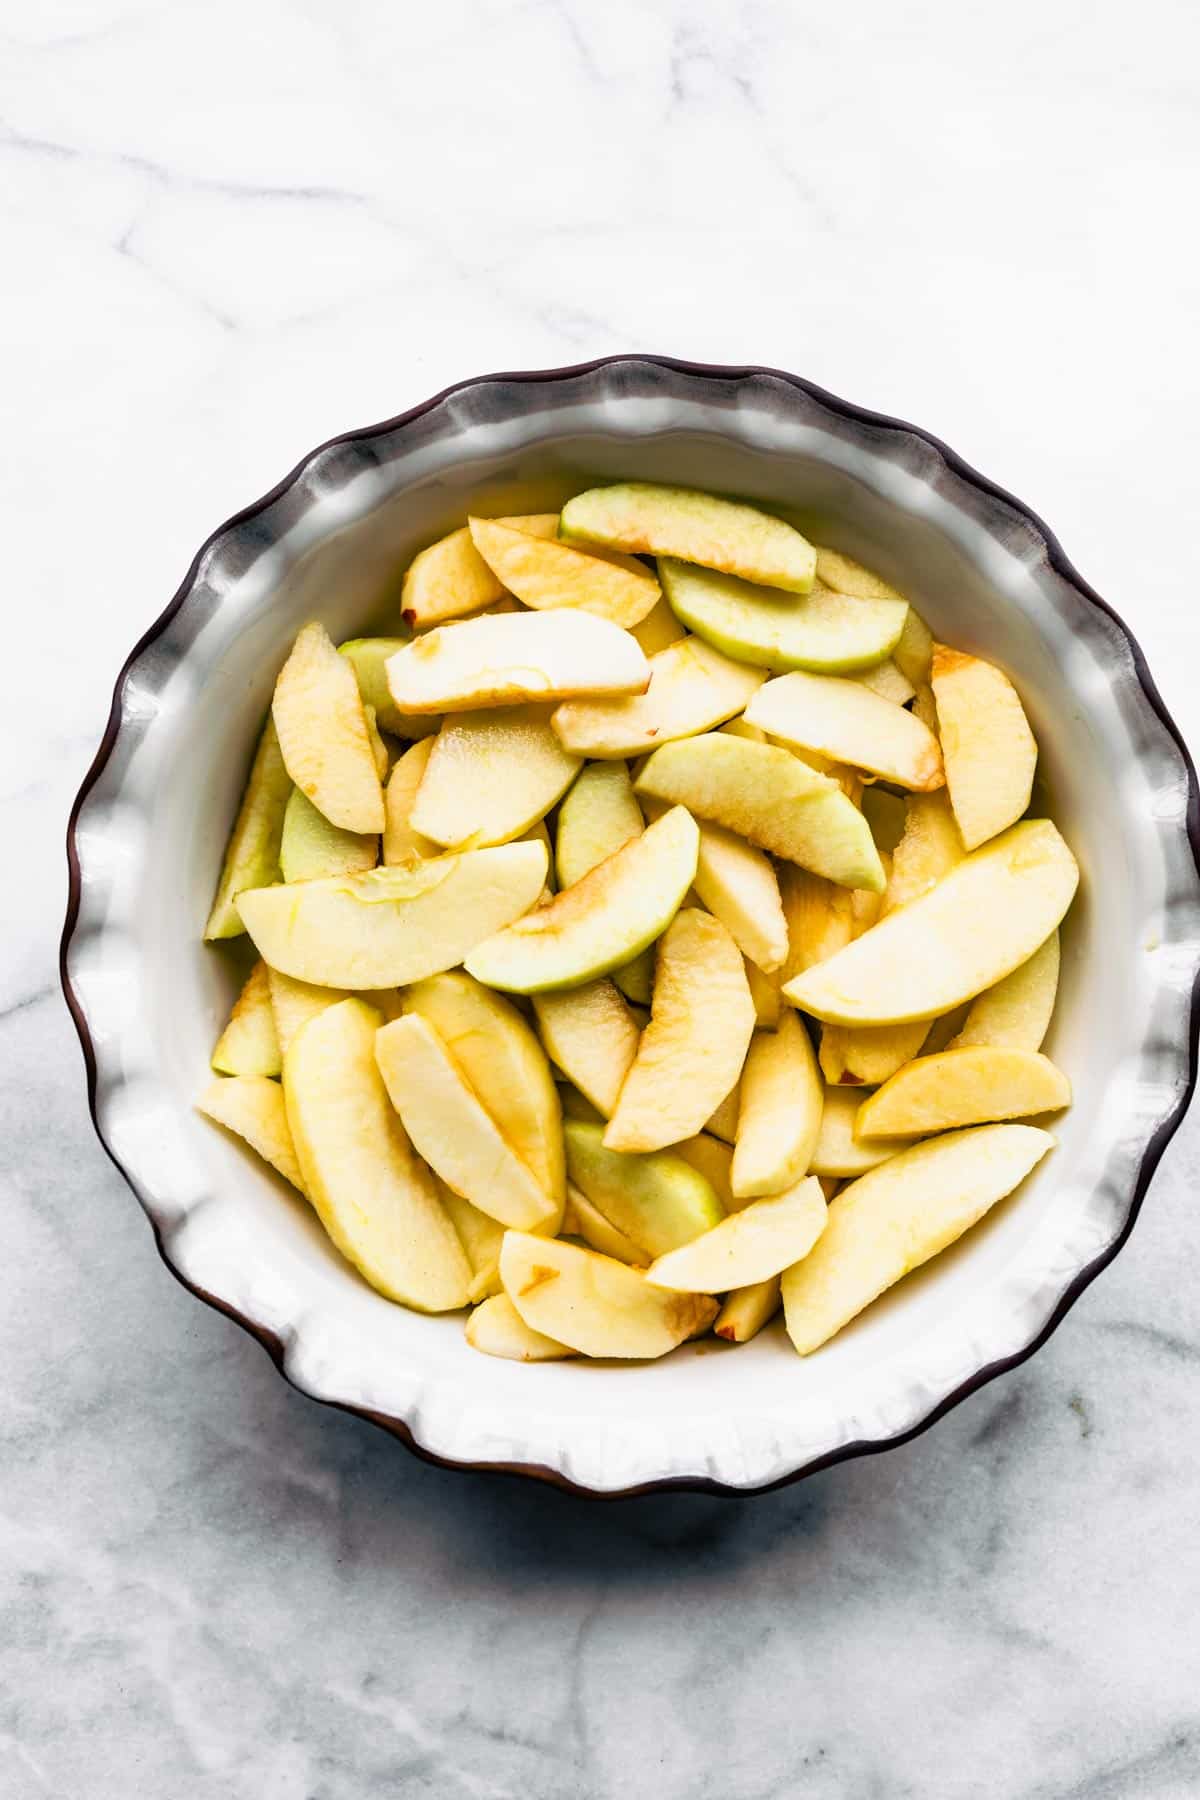 Overhead photo of peeled and slices apples in a white ceramic pie pan.